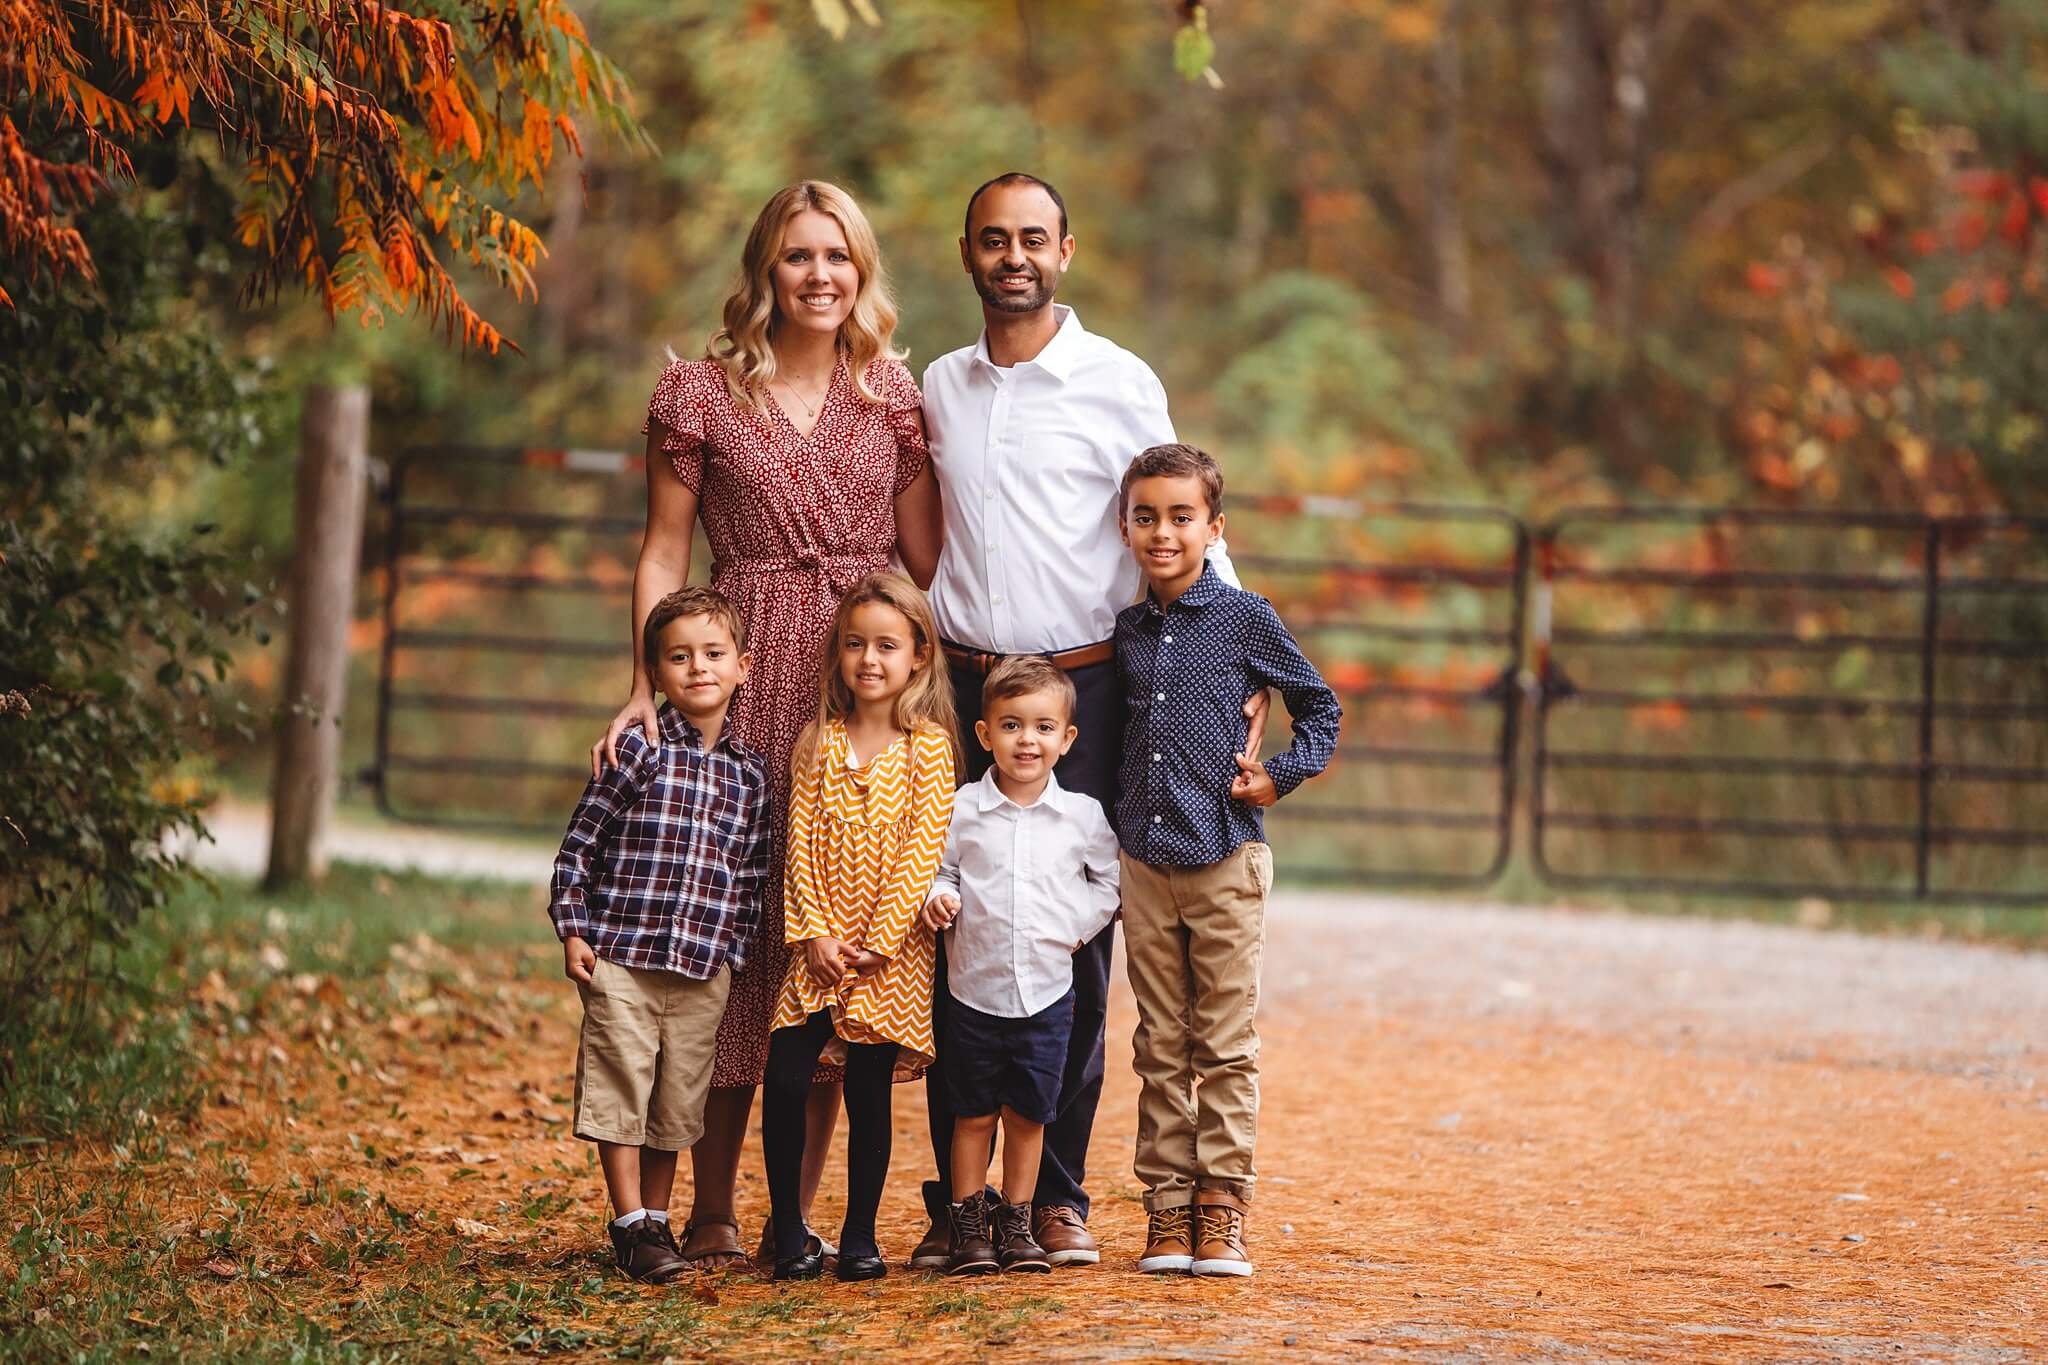 Fall Family Portrait of two parents with their four children standing in front of a fence surrounded in fall leaves